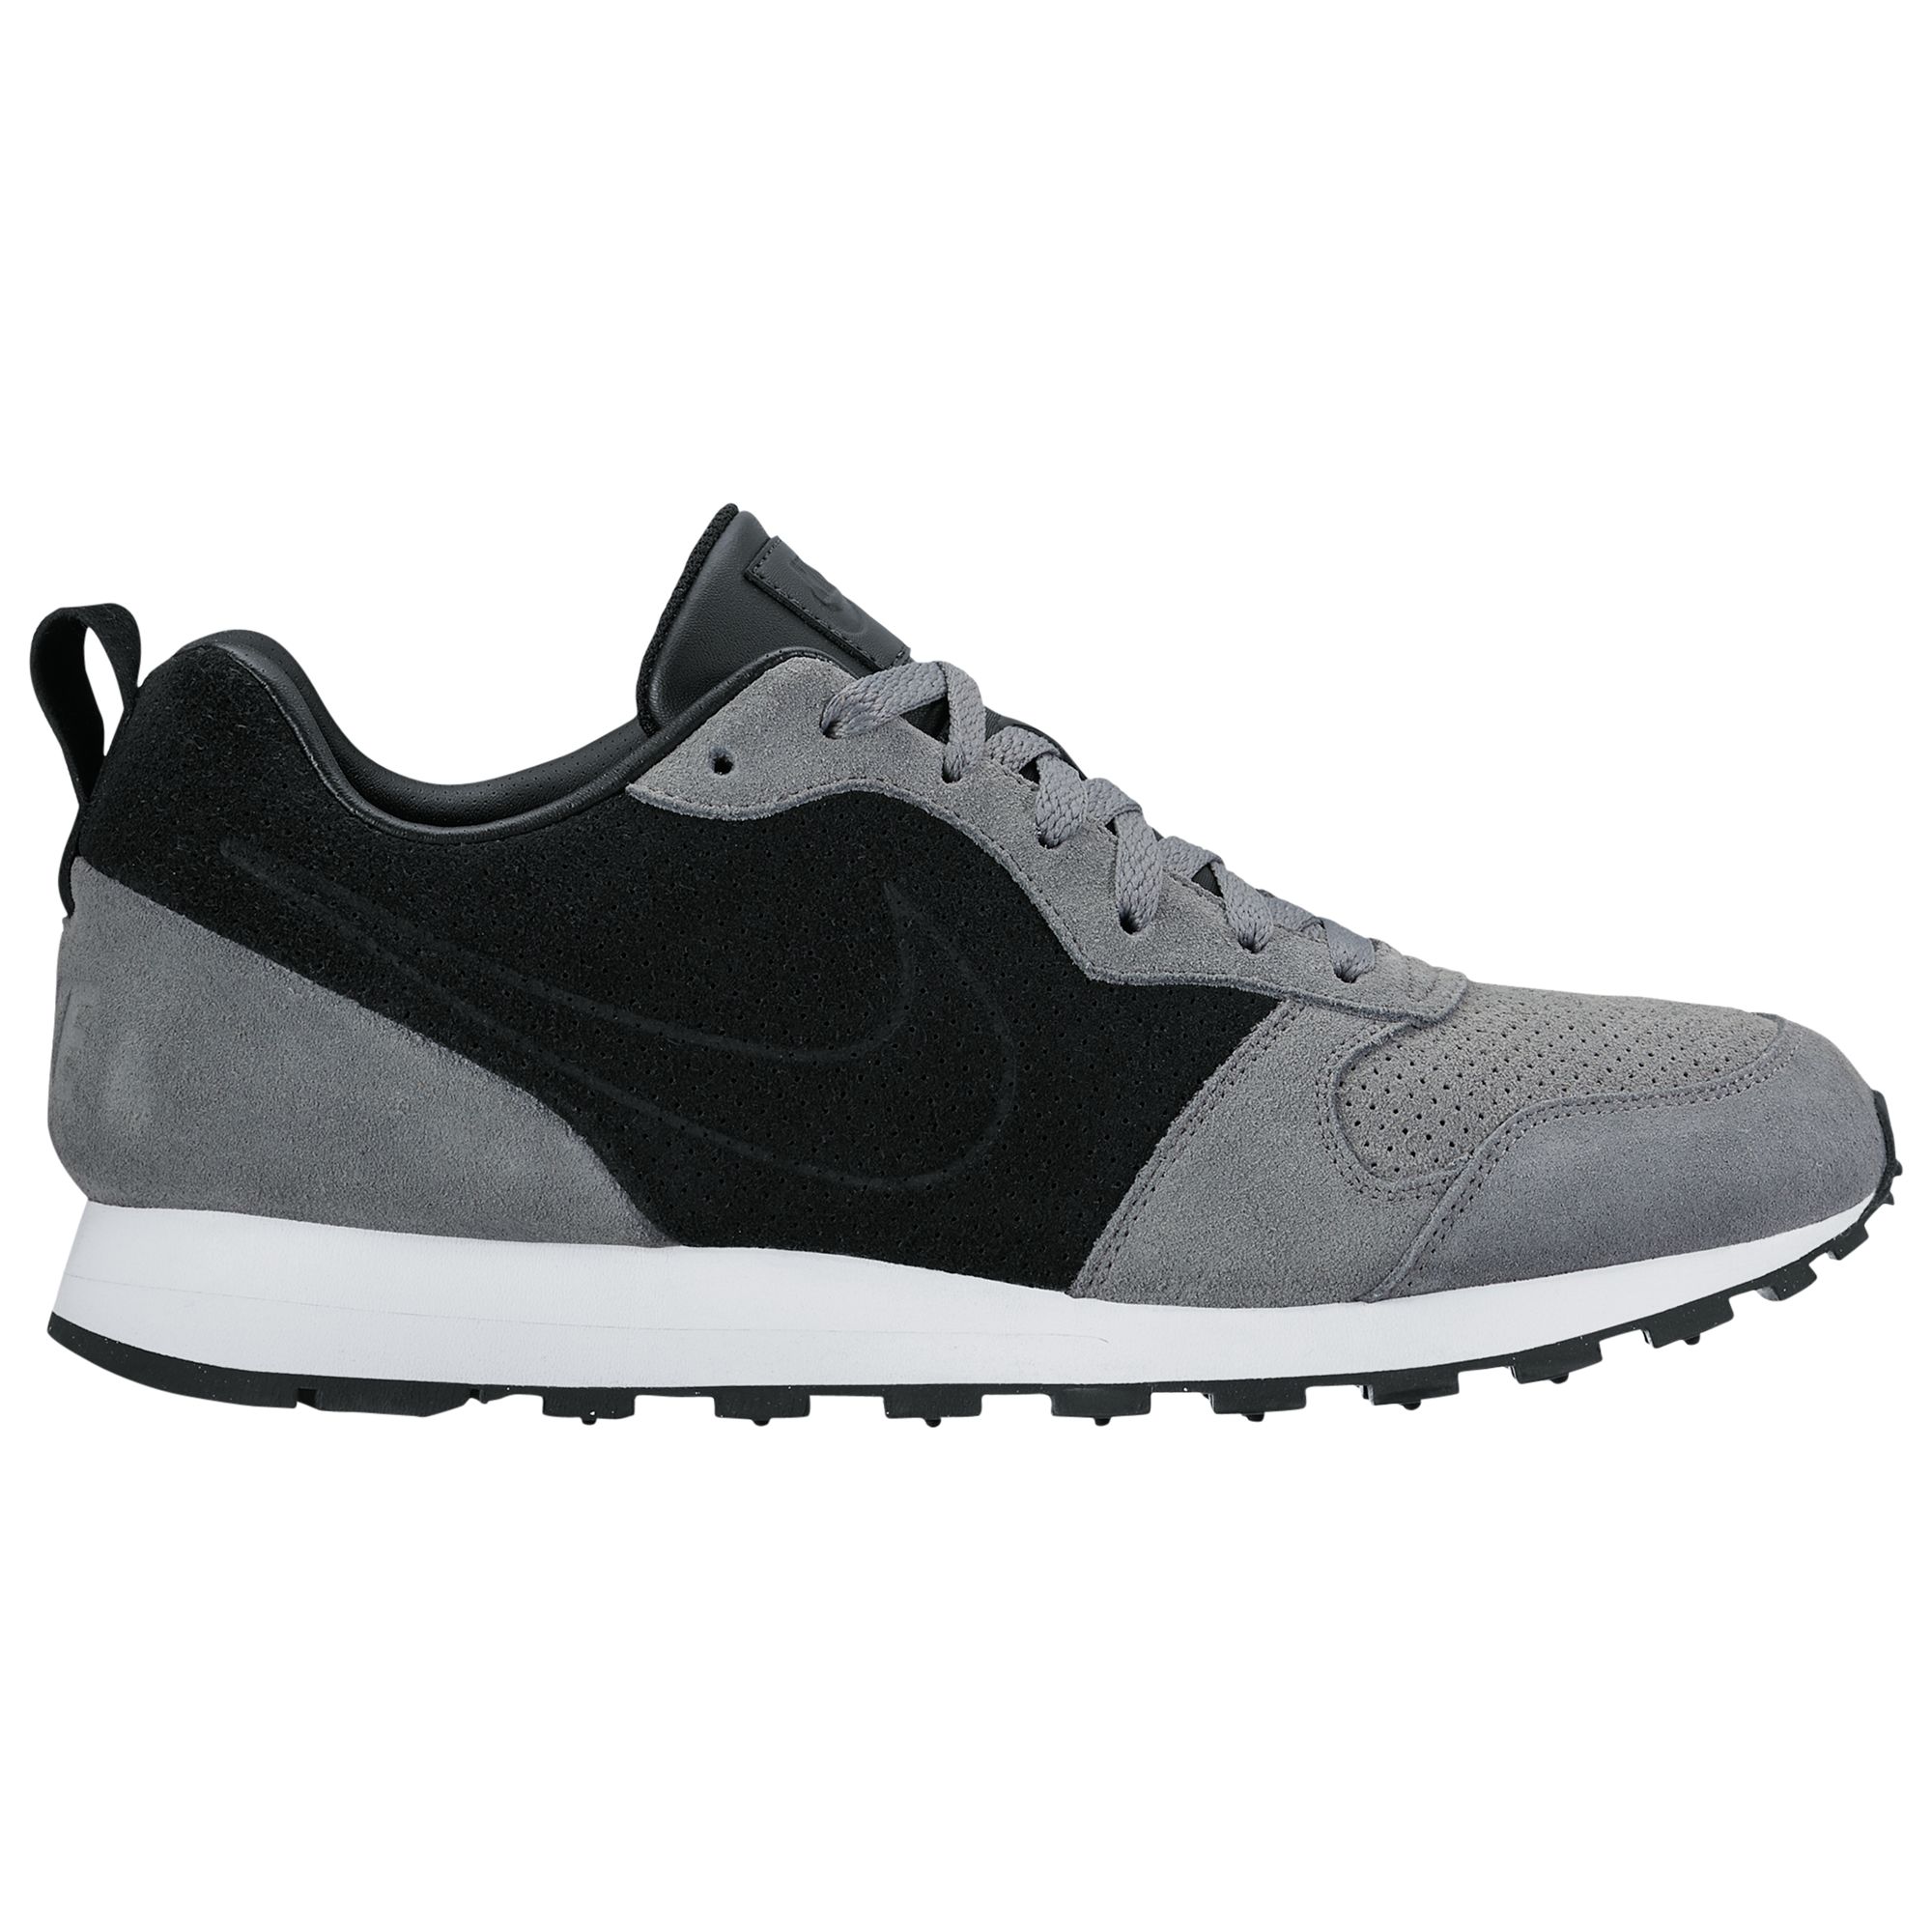 nike md runner leather